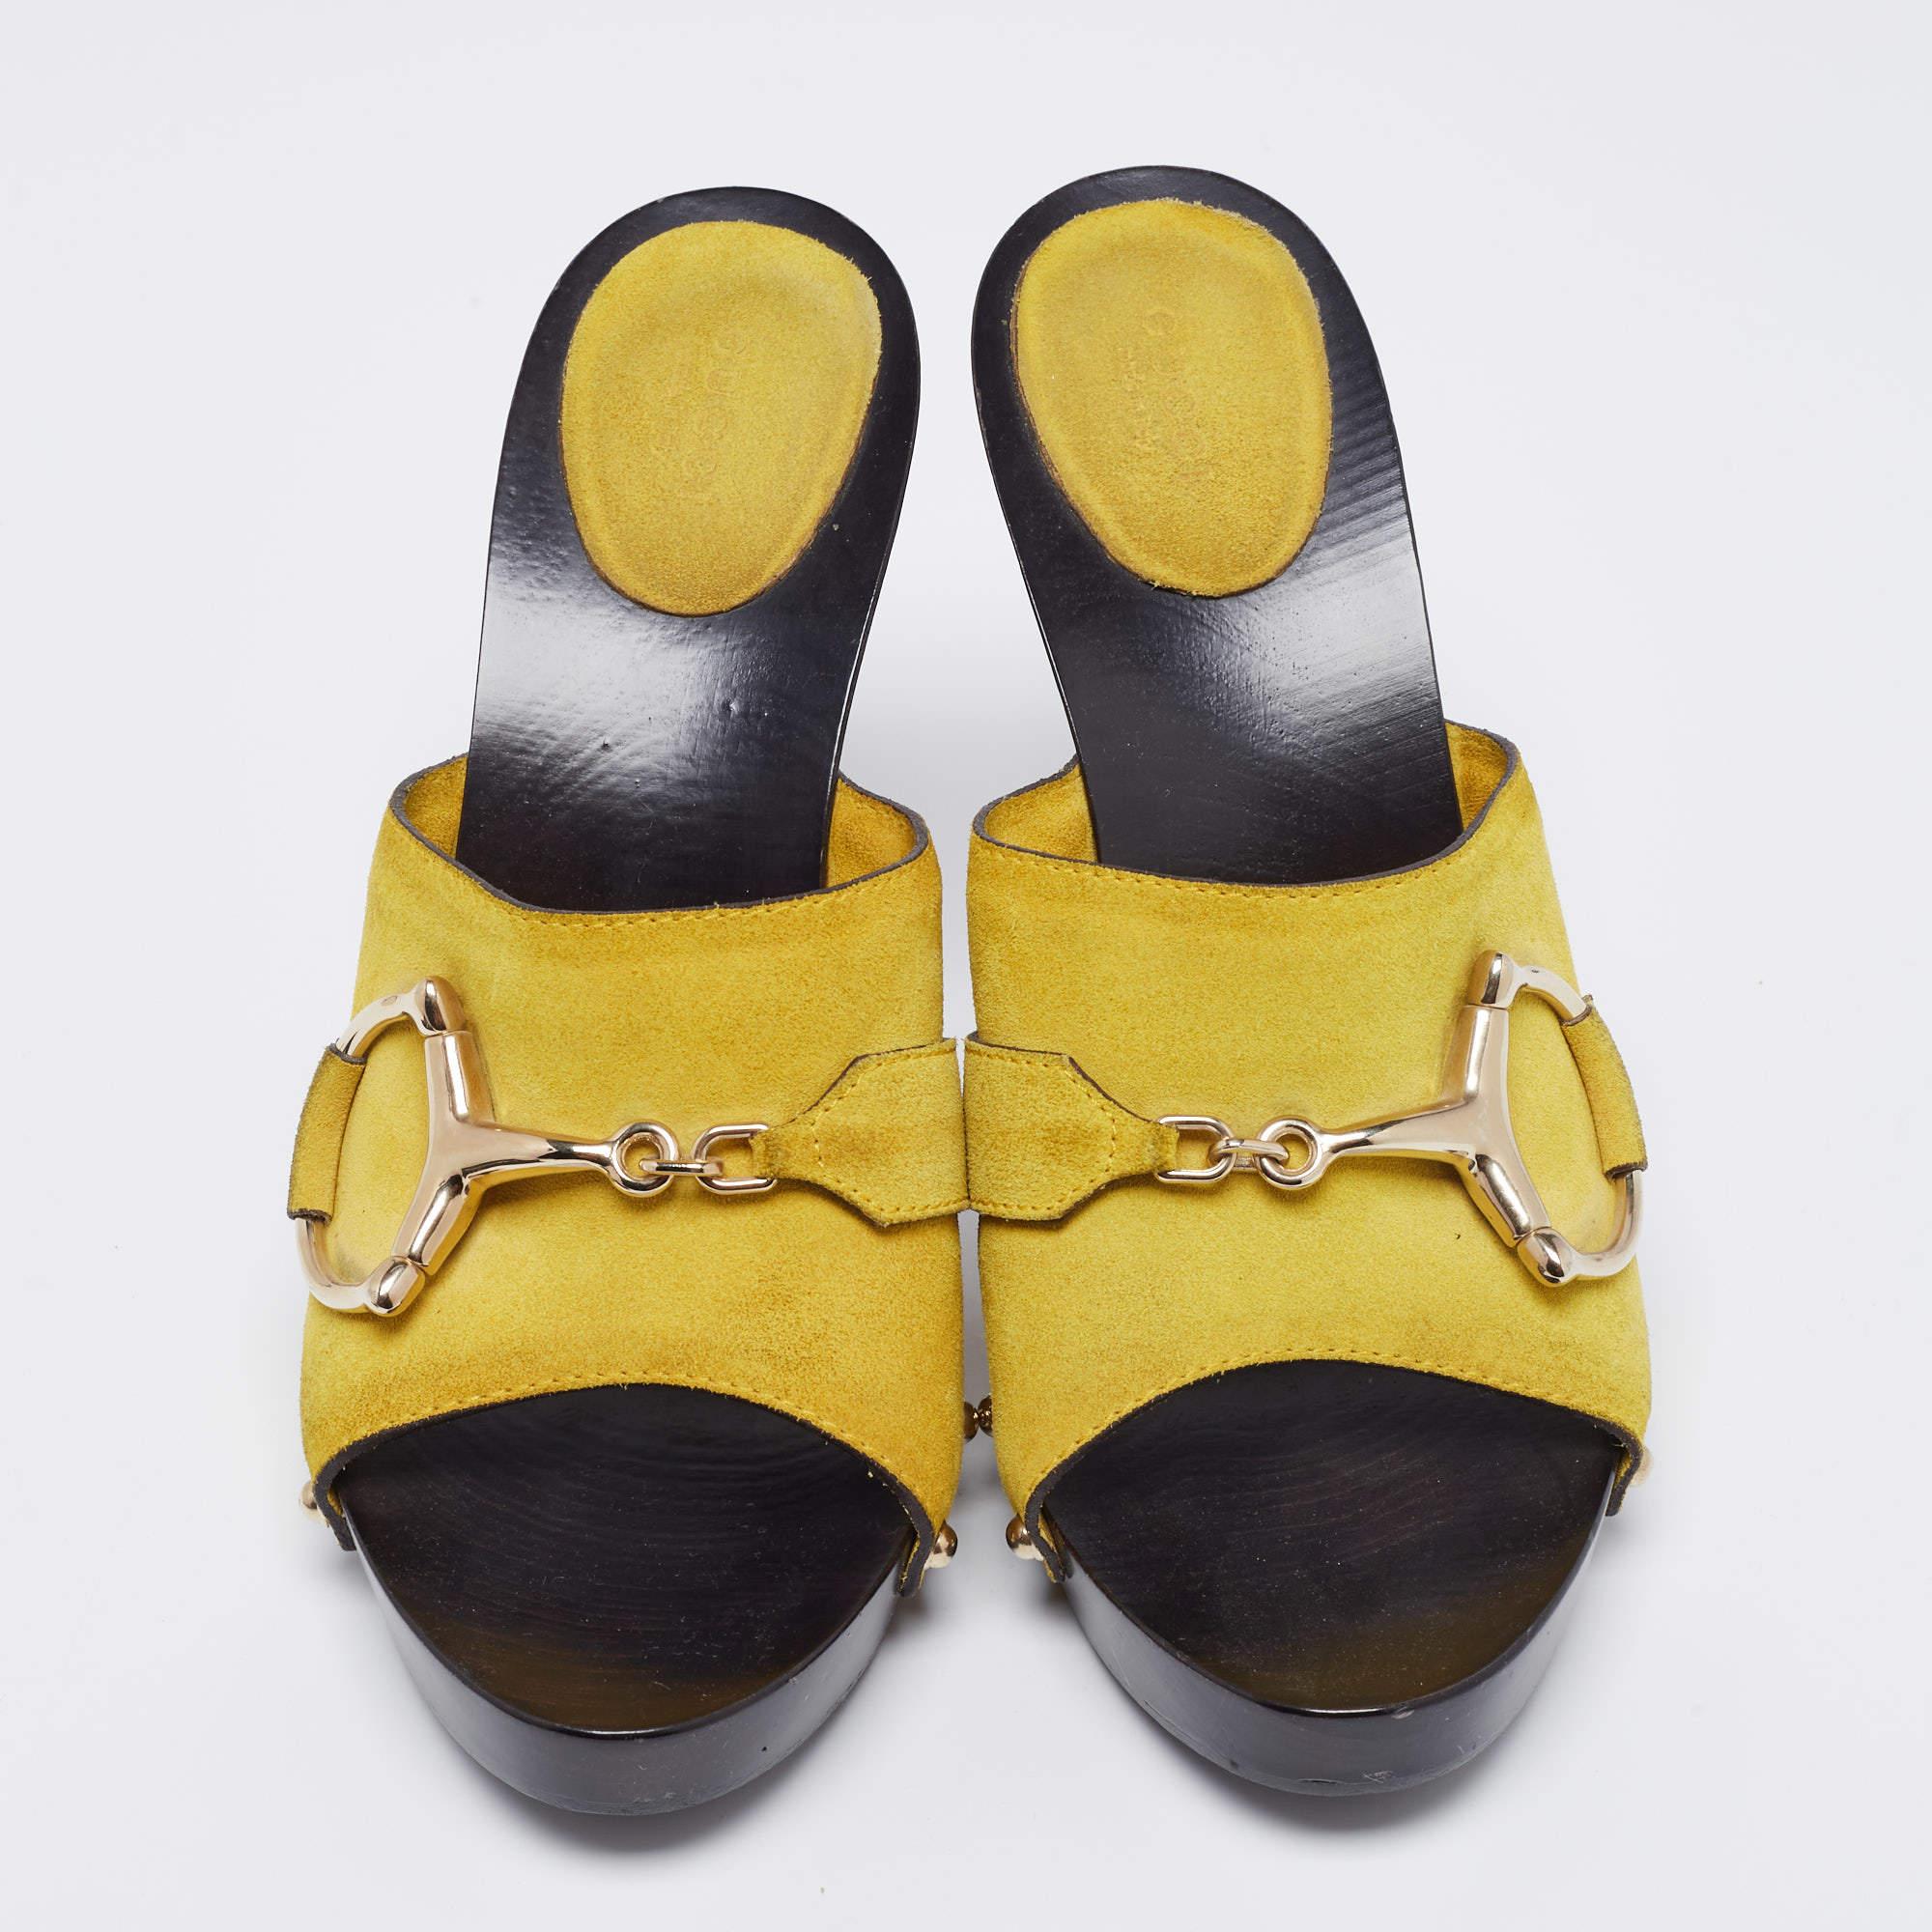 Gucci presents its own take on 1970s style with clogs in yellow-colored suede with signature Horsebit motif. They boast clog-style silver studs, Horsebits, and a wooden platform and heel for a chunky look. Perfect with a maxi dress at a summer